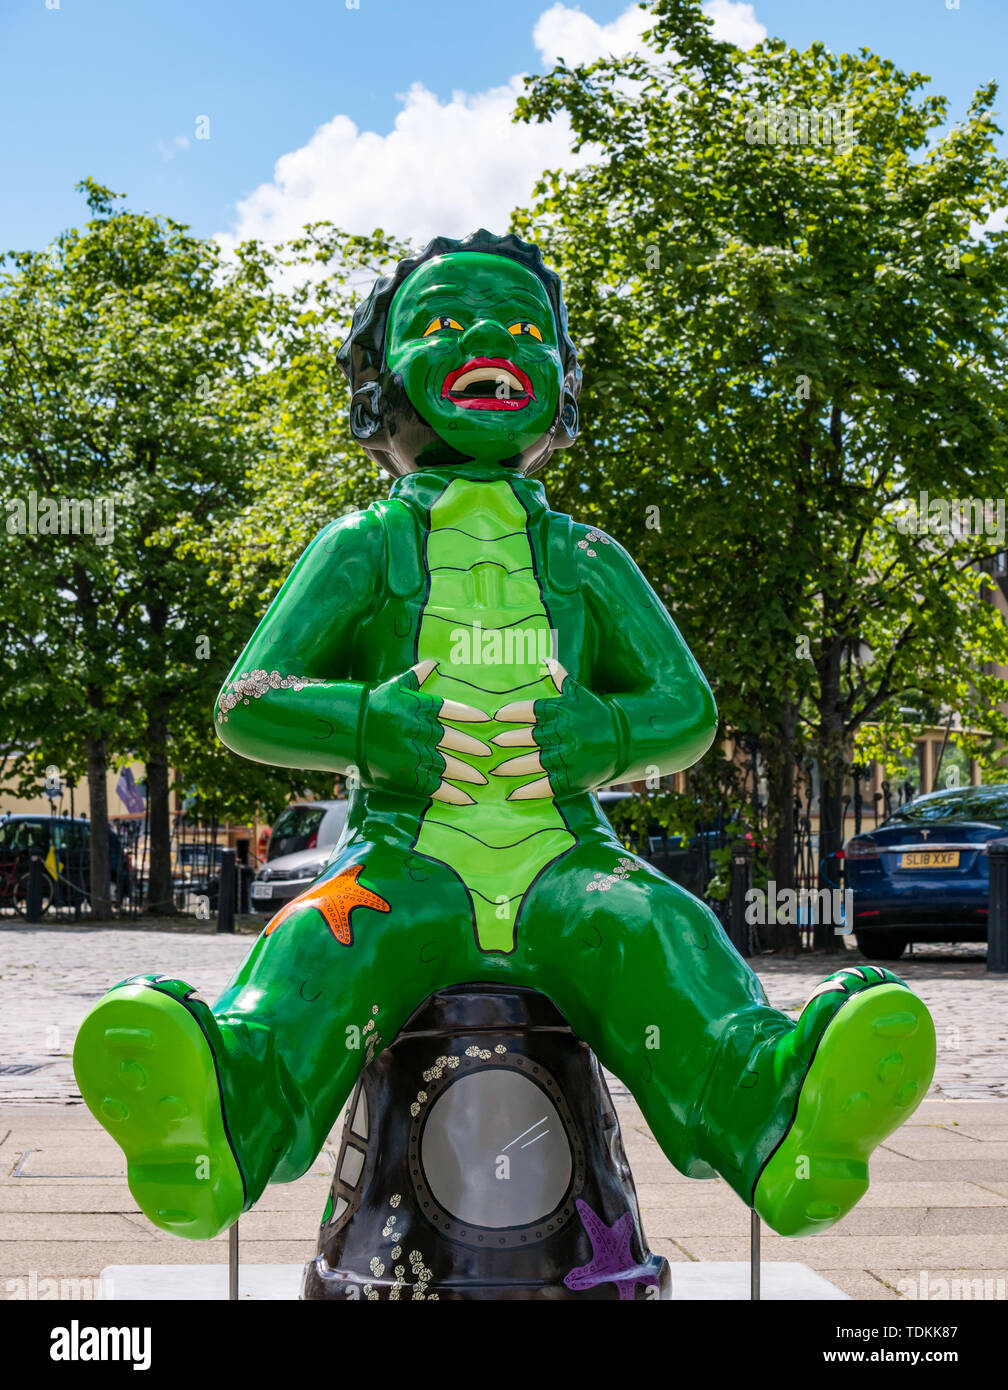 Leith, Edinburgh, Scotland, United Kingdom, 17 June 2019. Oor Wullie's Big Bucket Trail: An art trail of 200 Oor Wullie sculptures appear in Scottish cities in a mass arts event that lasts until August 30th. Oor Wullie is an iconic Scottish cartoon character. The sculptures will be auctioned to raise money for Scotland’s children’s hospital charities There are 5 in the Leith area, and 60 in Edinburgh altogether. Oor Wullie by Ruairidh Brunton Stock Photo